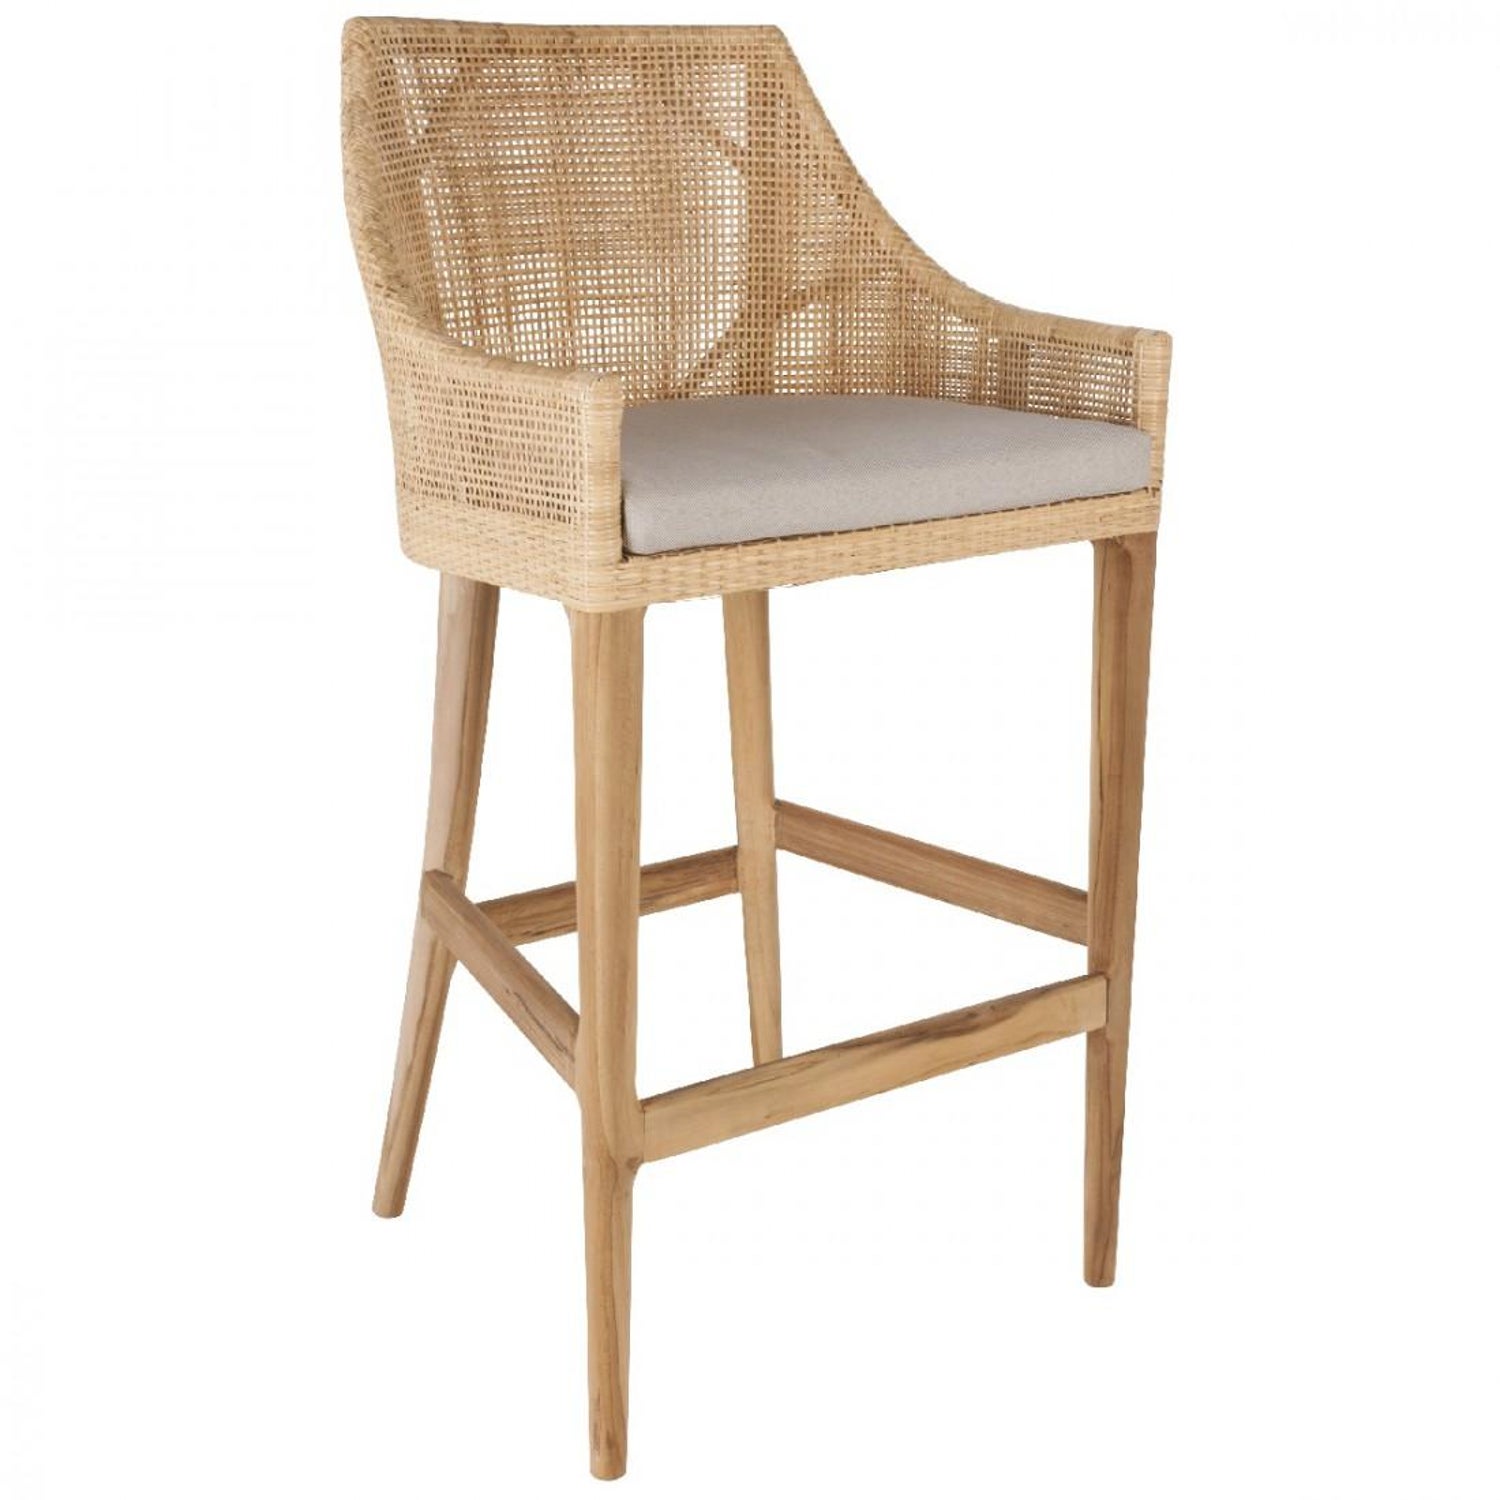 Wooden Teak And Rattan Bar Stool For, Wicker Counter Bar Stools